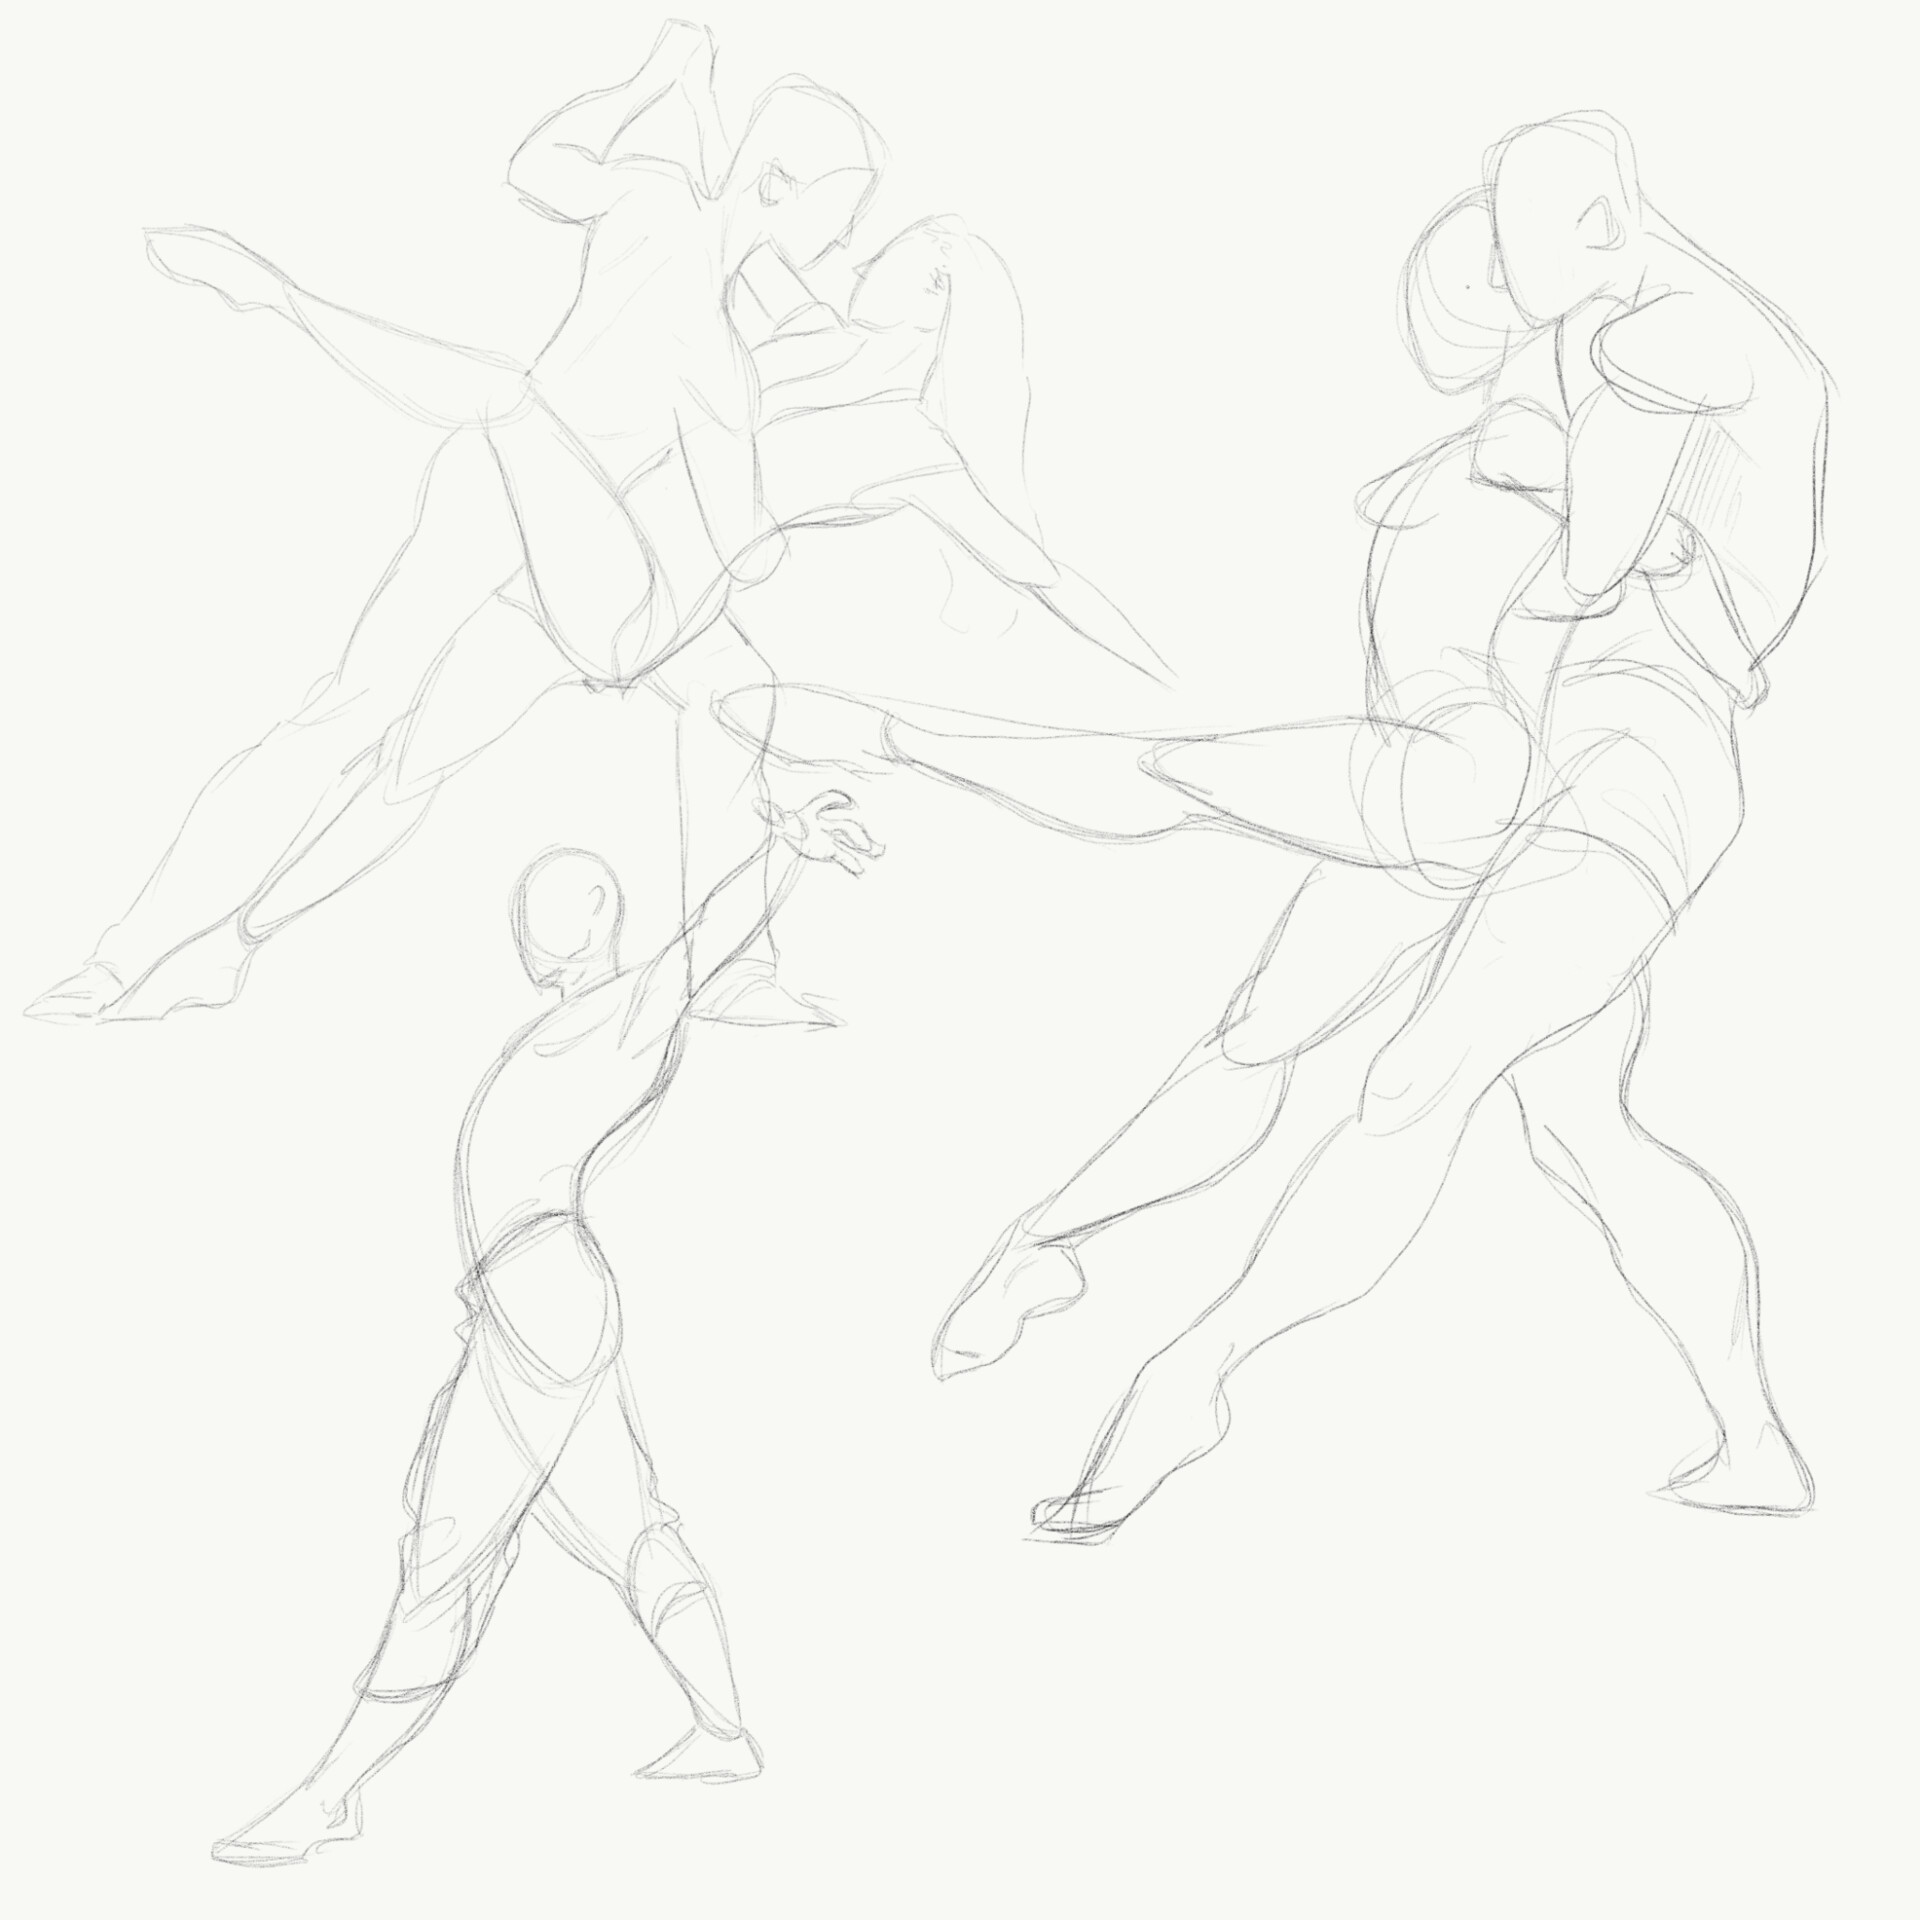 How to draw a body (ballet pose) / Tutorial and Practice ✍✍ - YouTube